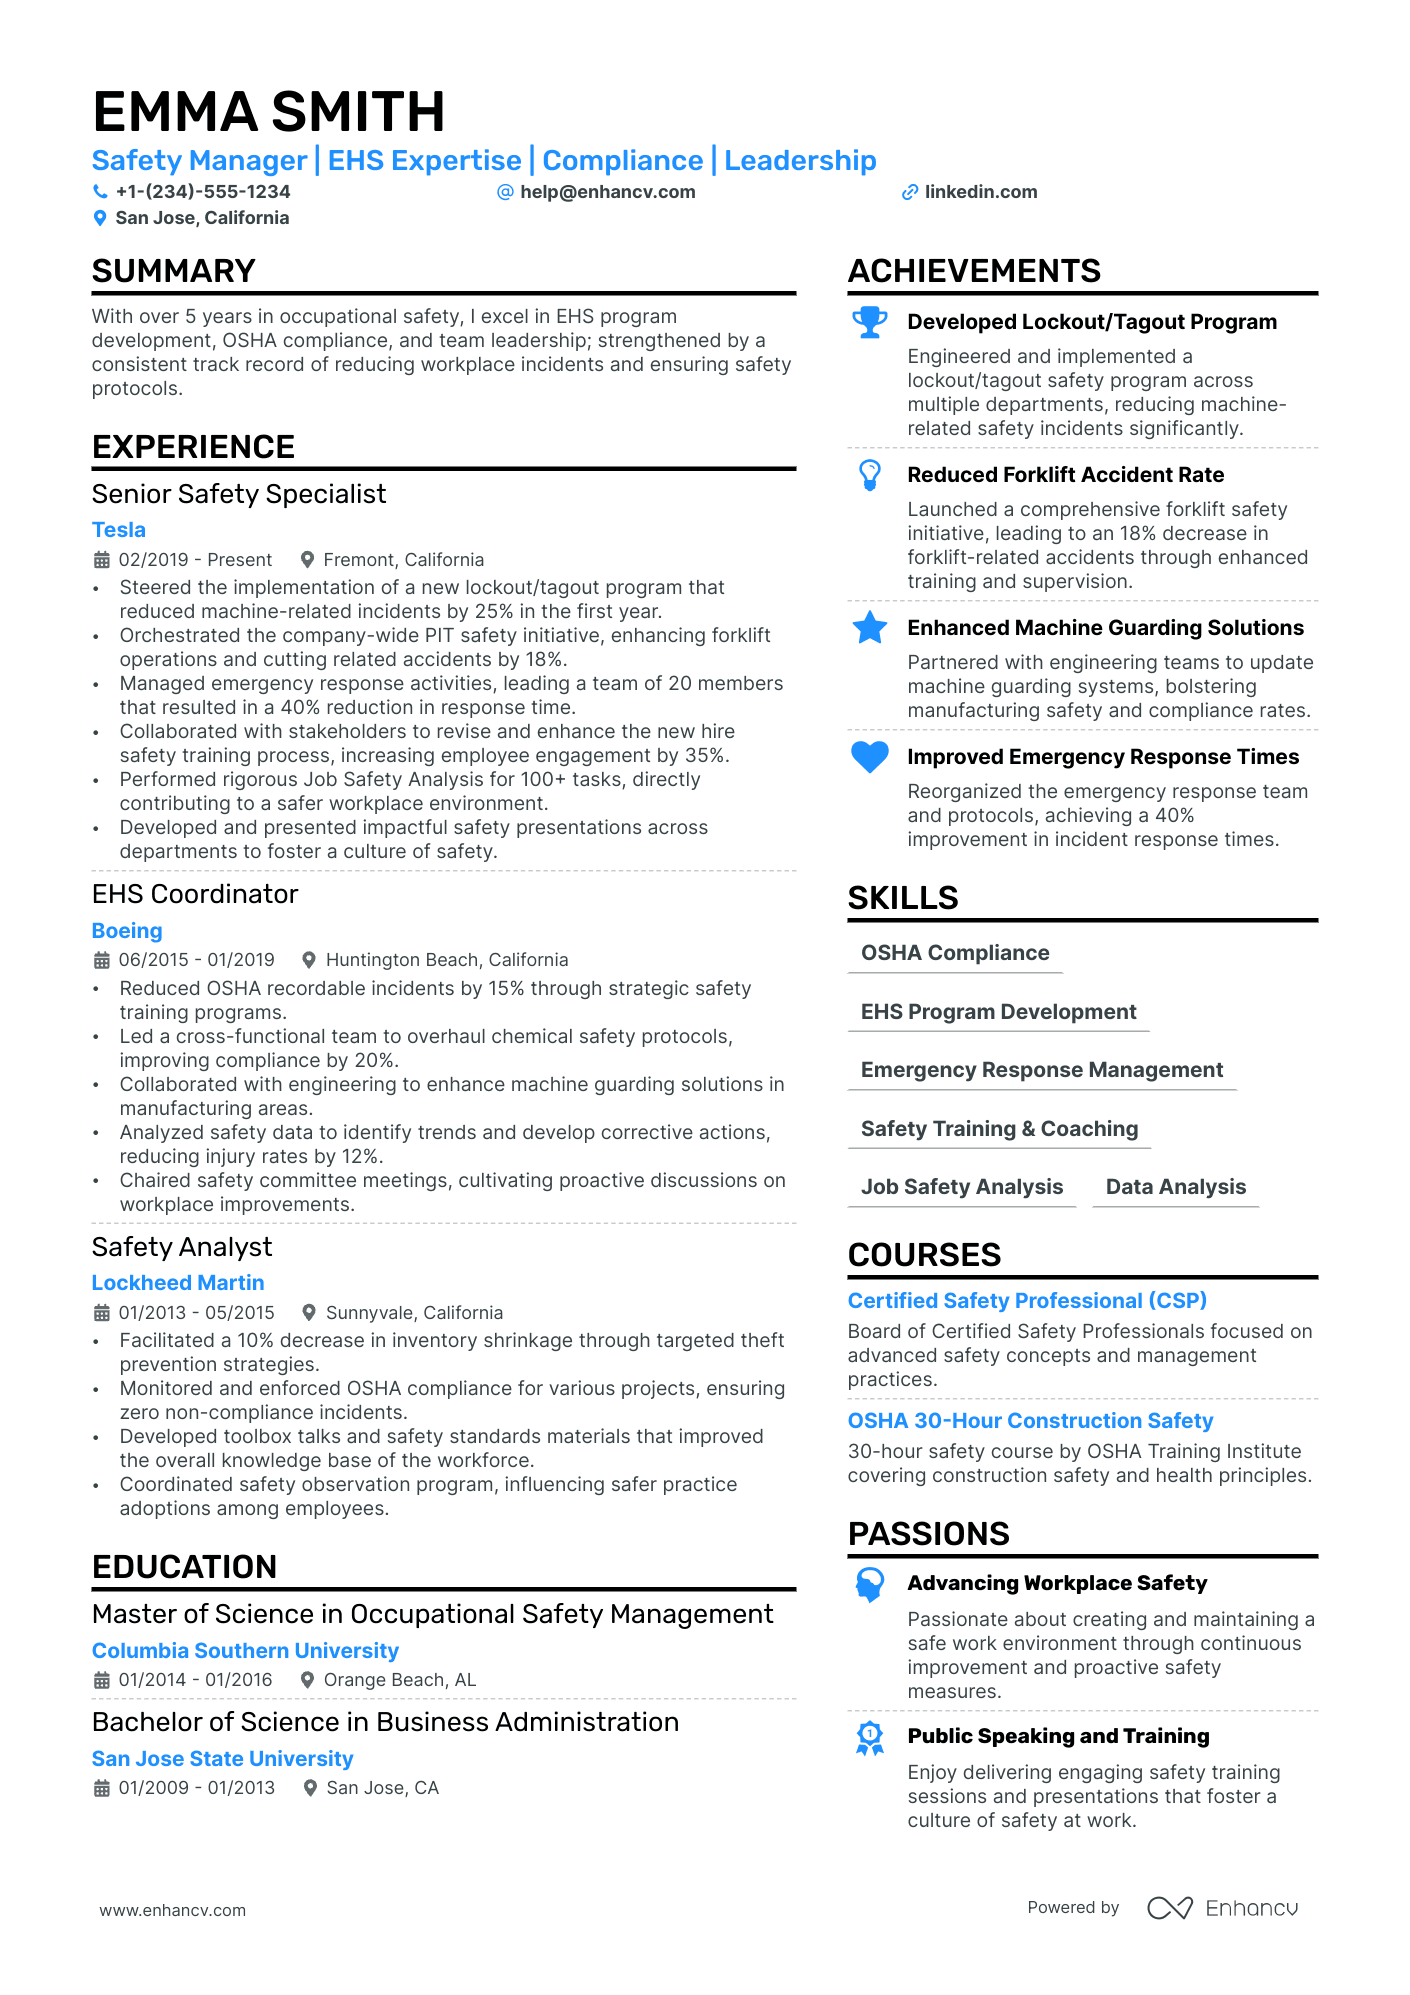 Safety Manager resume example